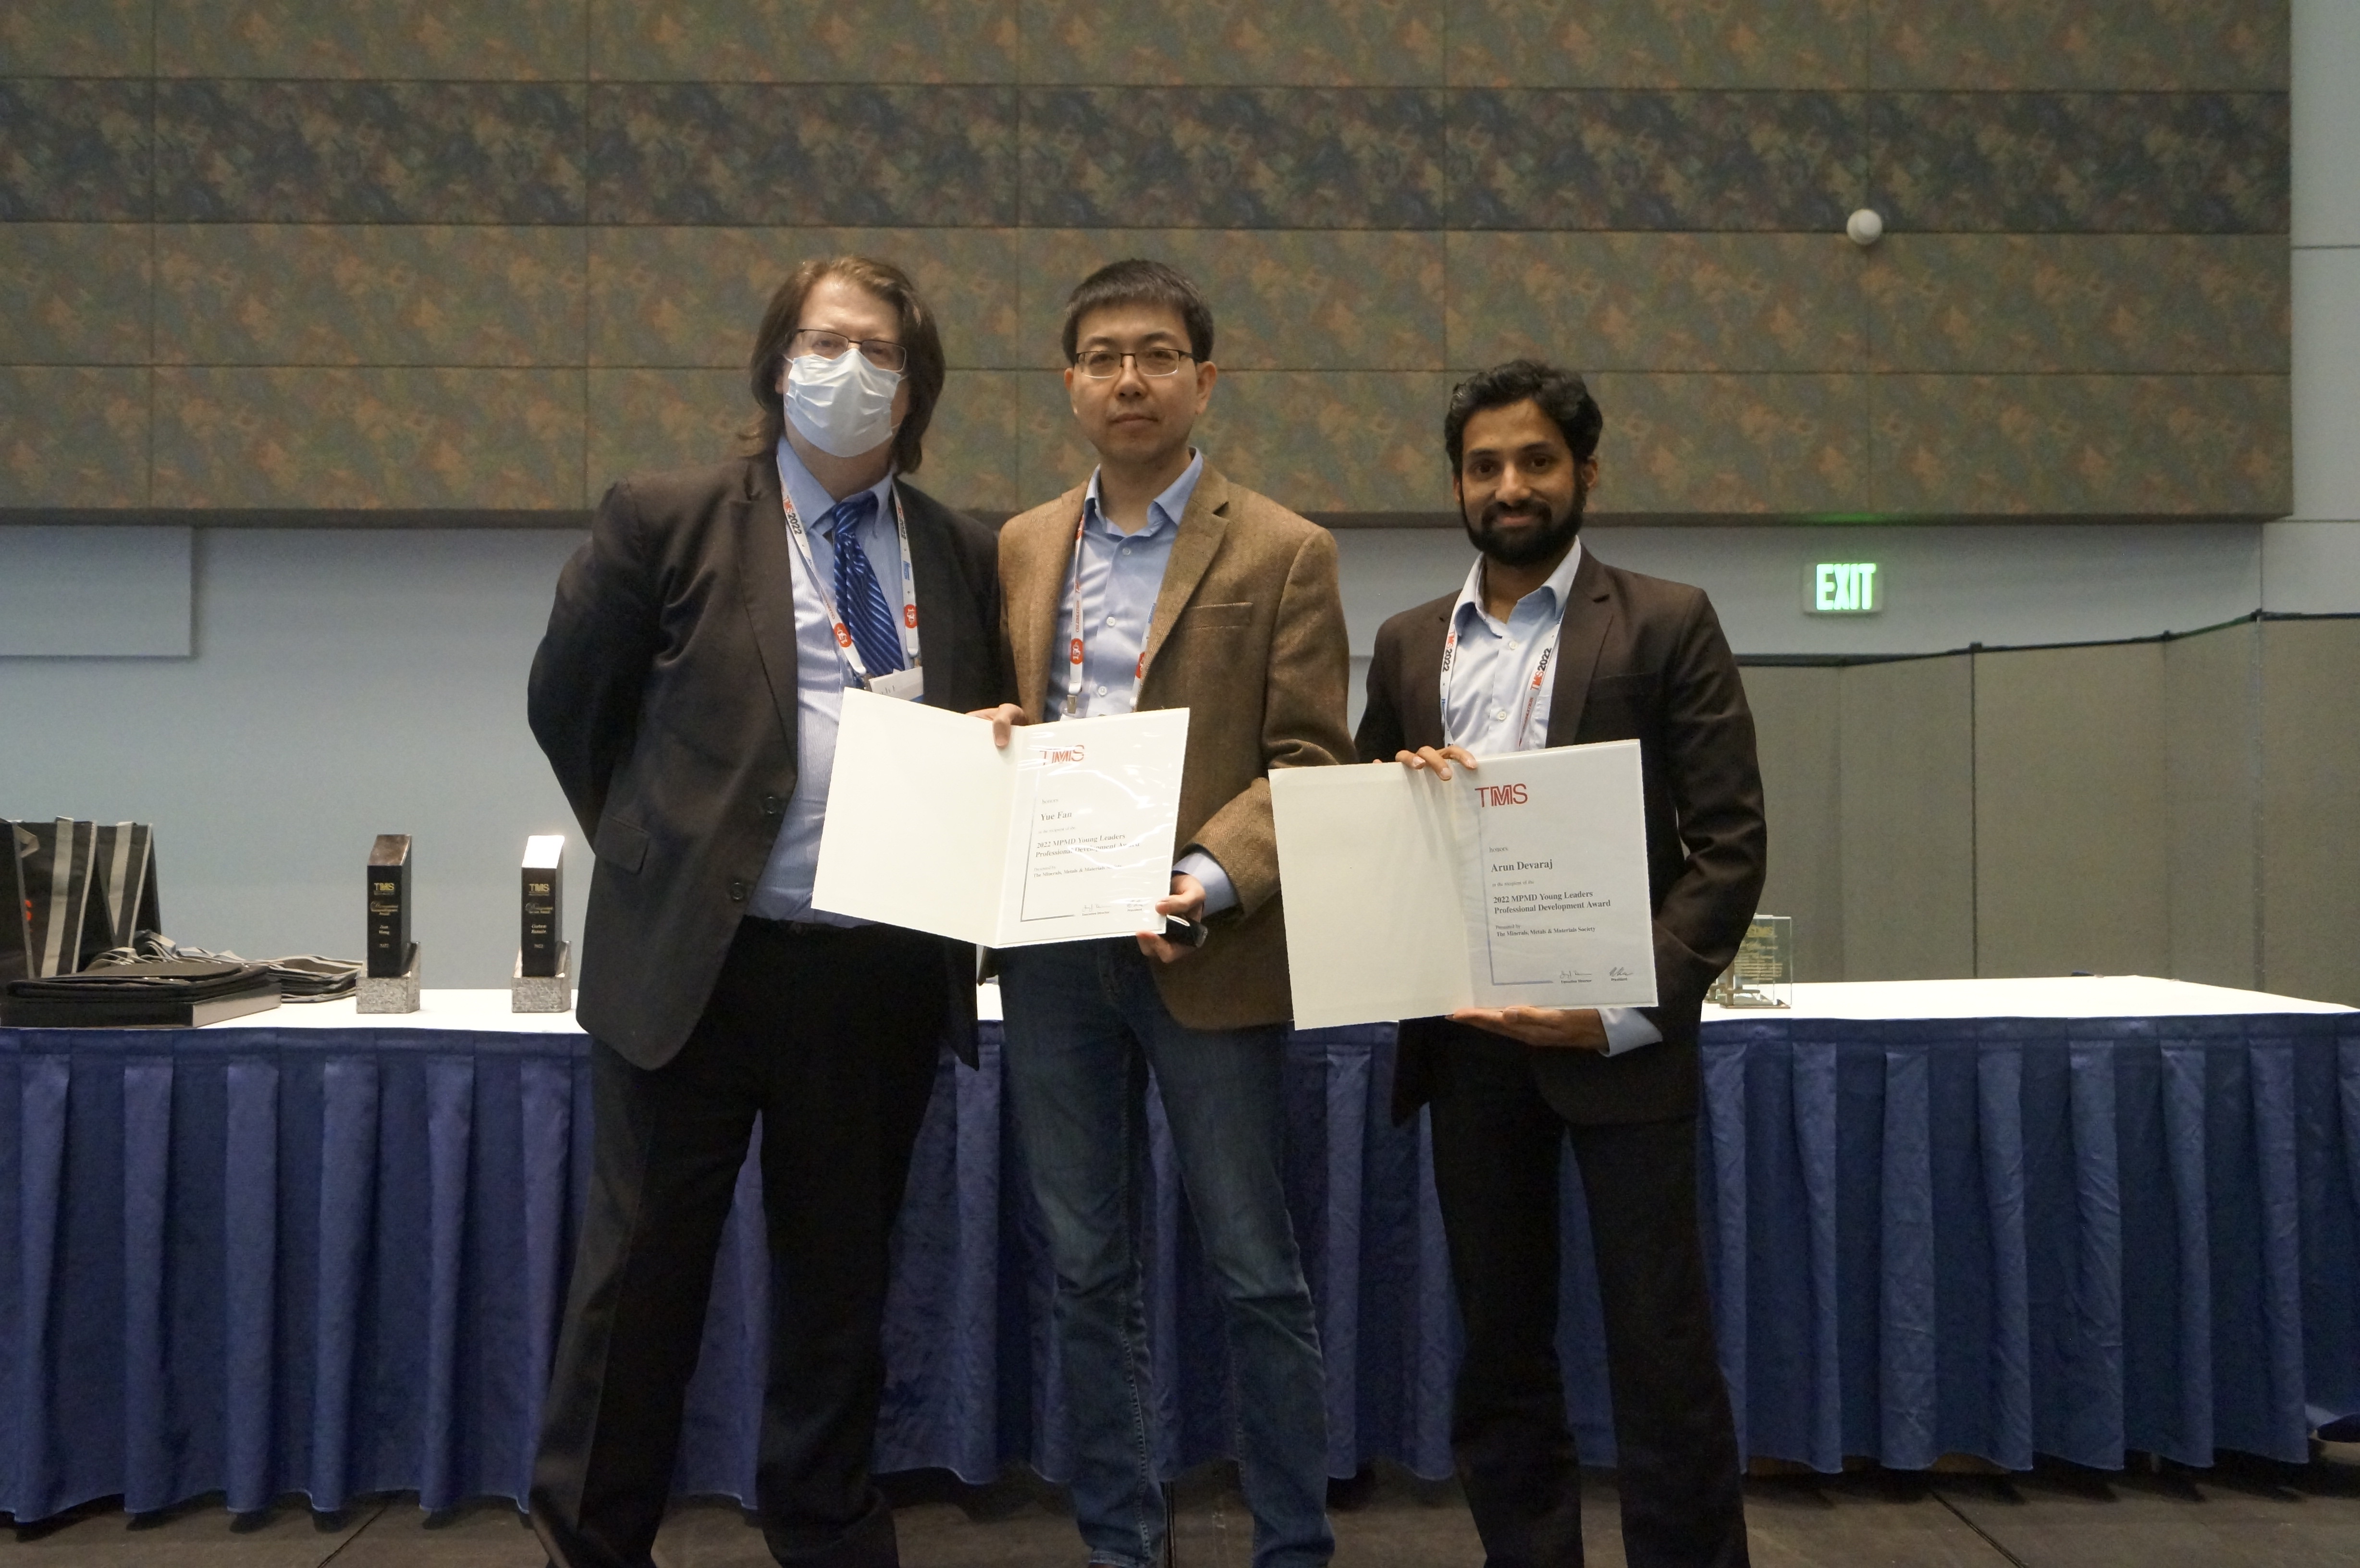 Three men stand side by side, two displaying folders with award certificates